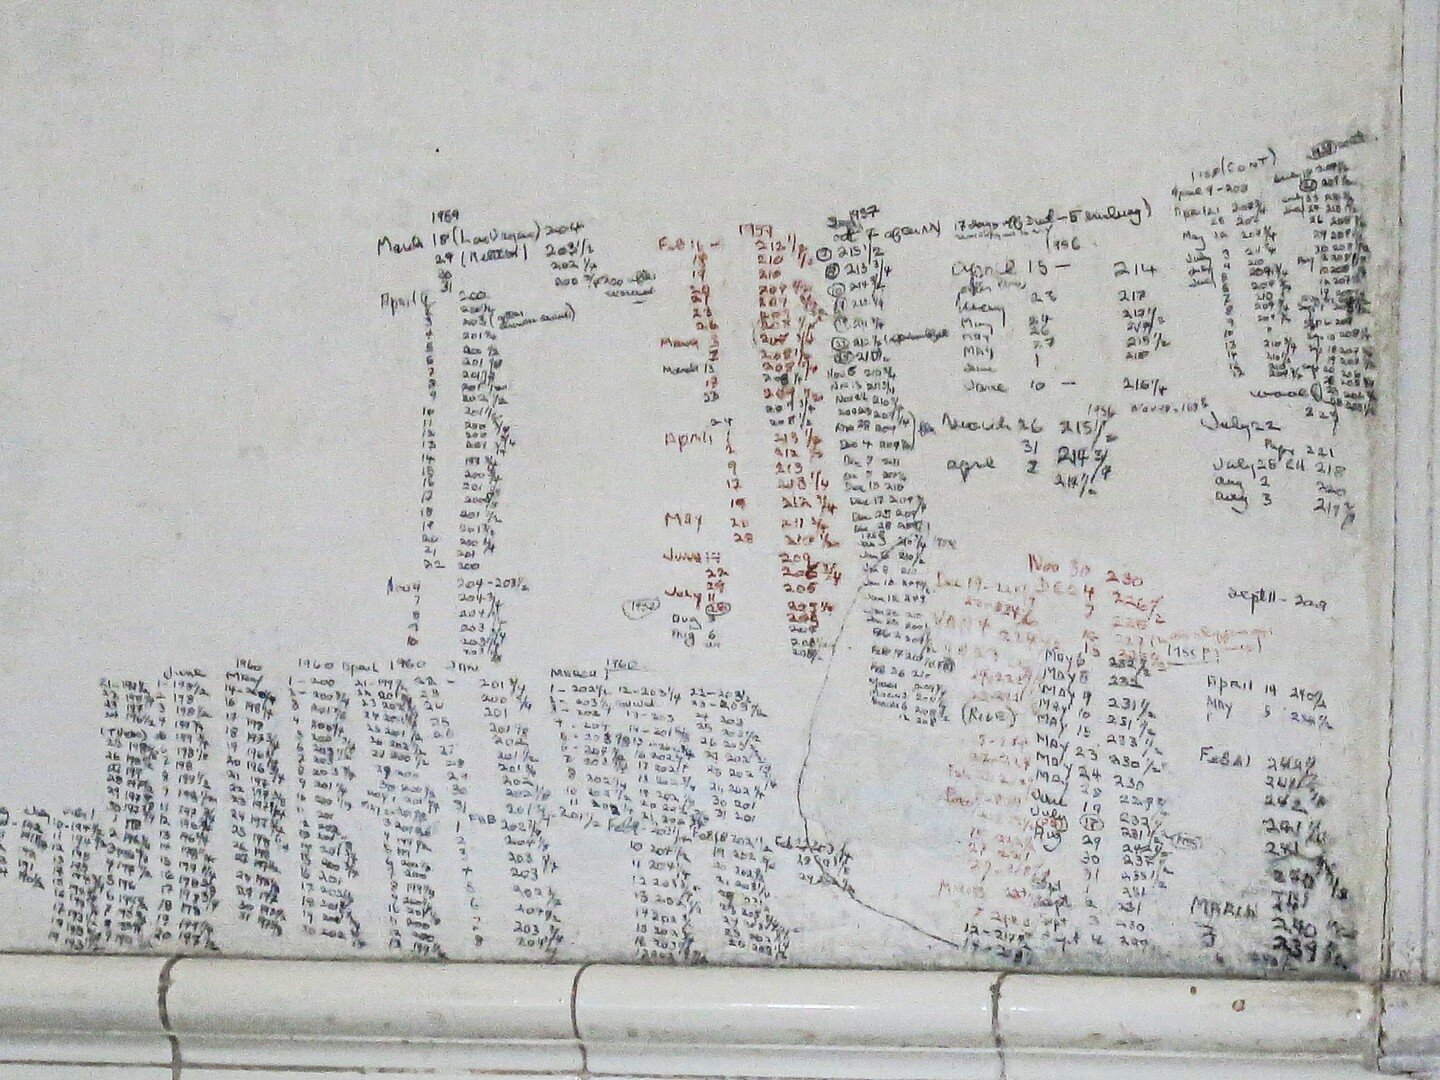 Speaking of candidates for #ozempic, here's Ernesto Hemingway's bathroom wall at his Havana-outskirts ranch house #fincavigia, where, in his final decade, he was desperately trying to shed weight, obsessively documenting his progress from 1950 onward